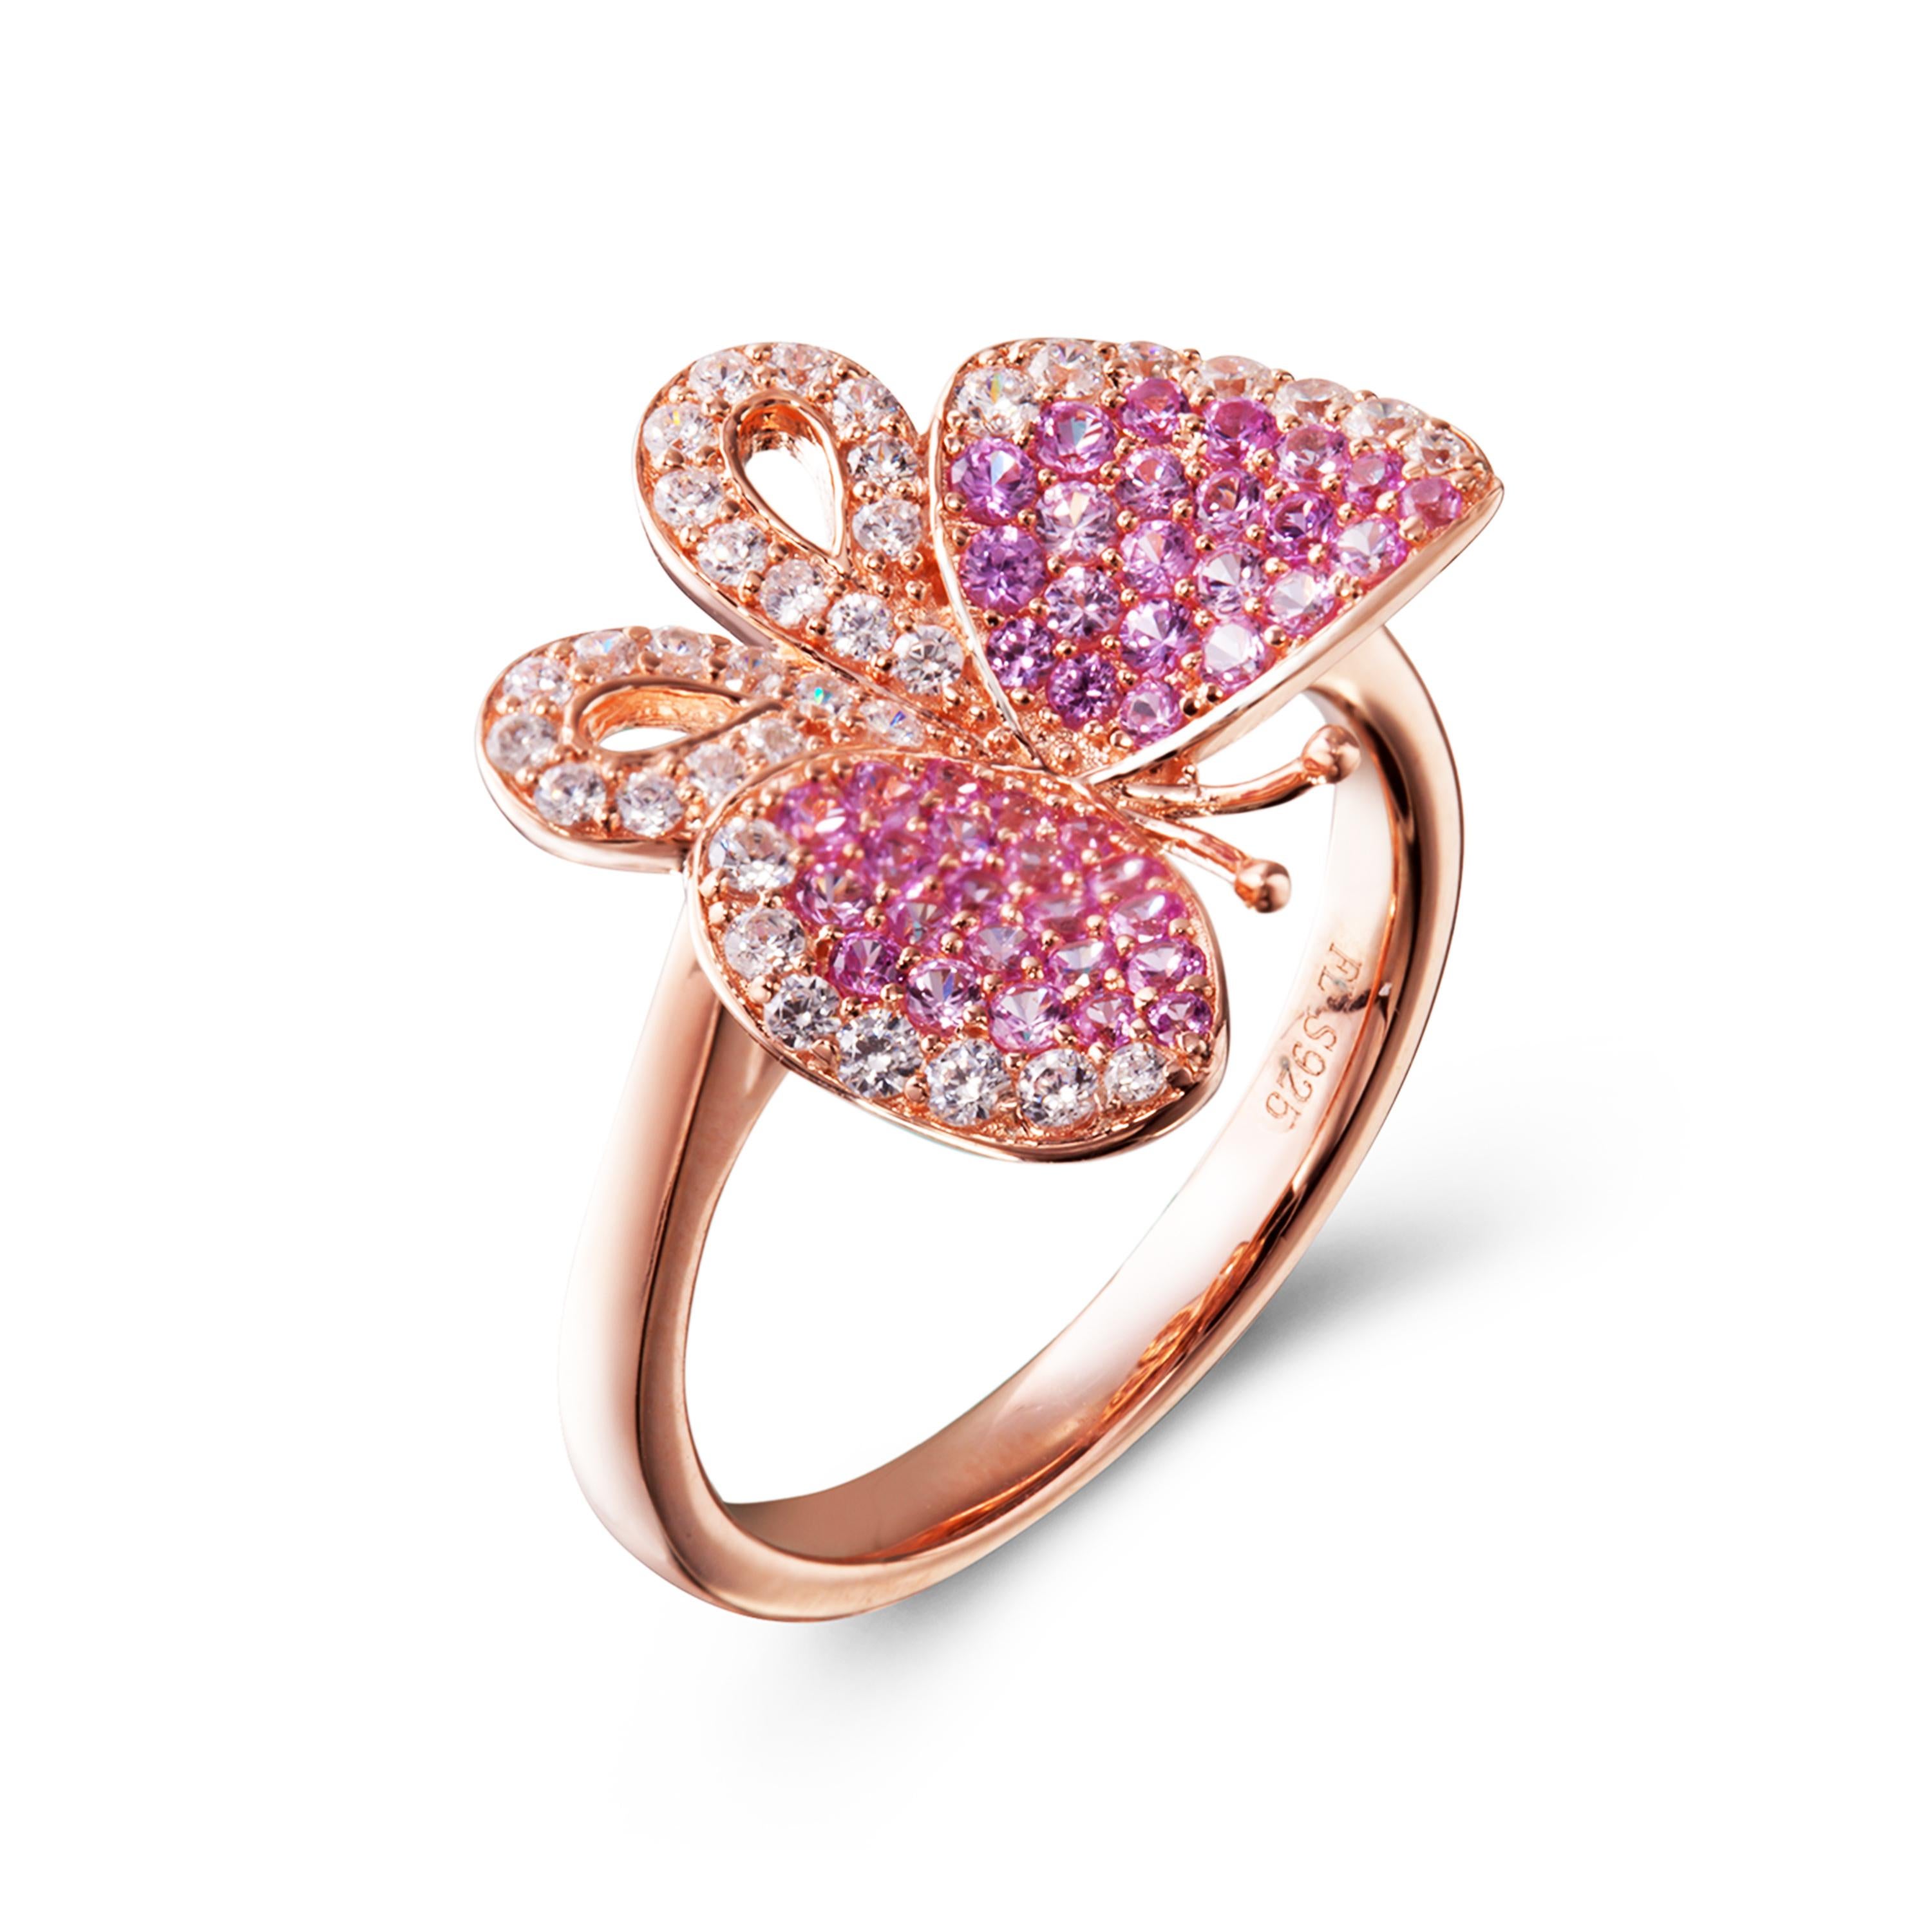 Butterfly captures the feminine essence and the carefree, joyful movement of these intricate and delicate creatures in sparkling weightless jewels. Butterfly ring with wings bejewelled in ruby pink and white cubic zirconia set in white rhodium plate